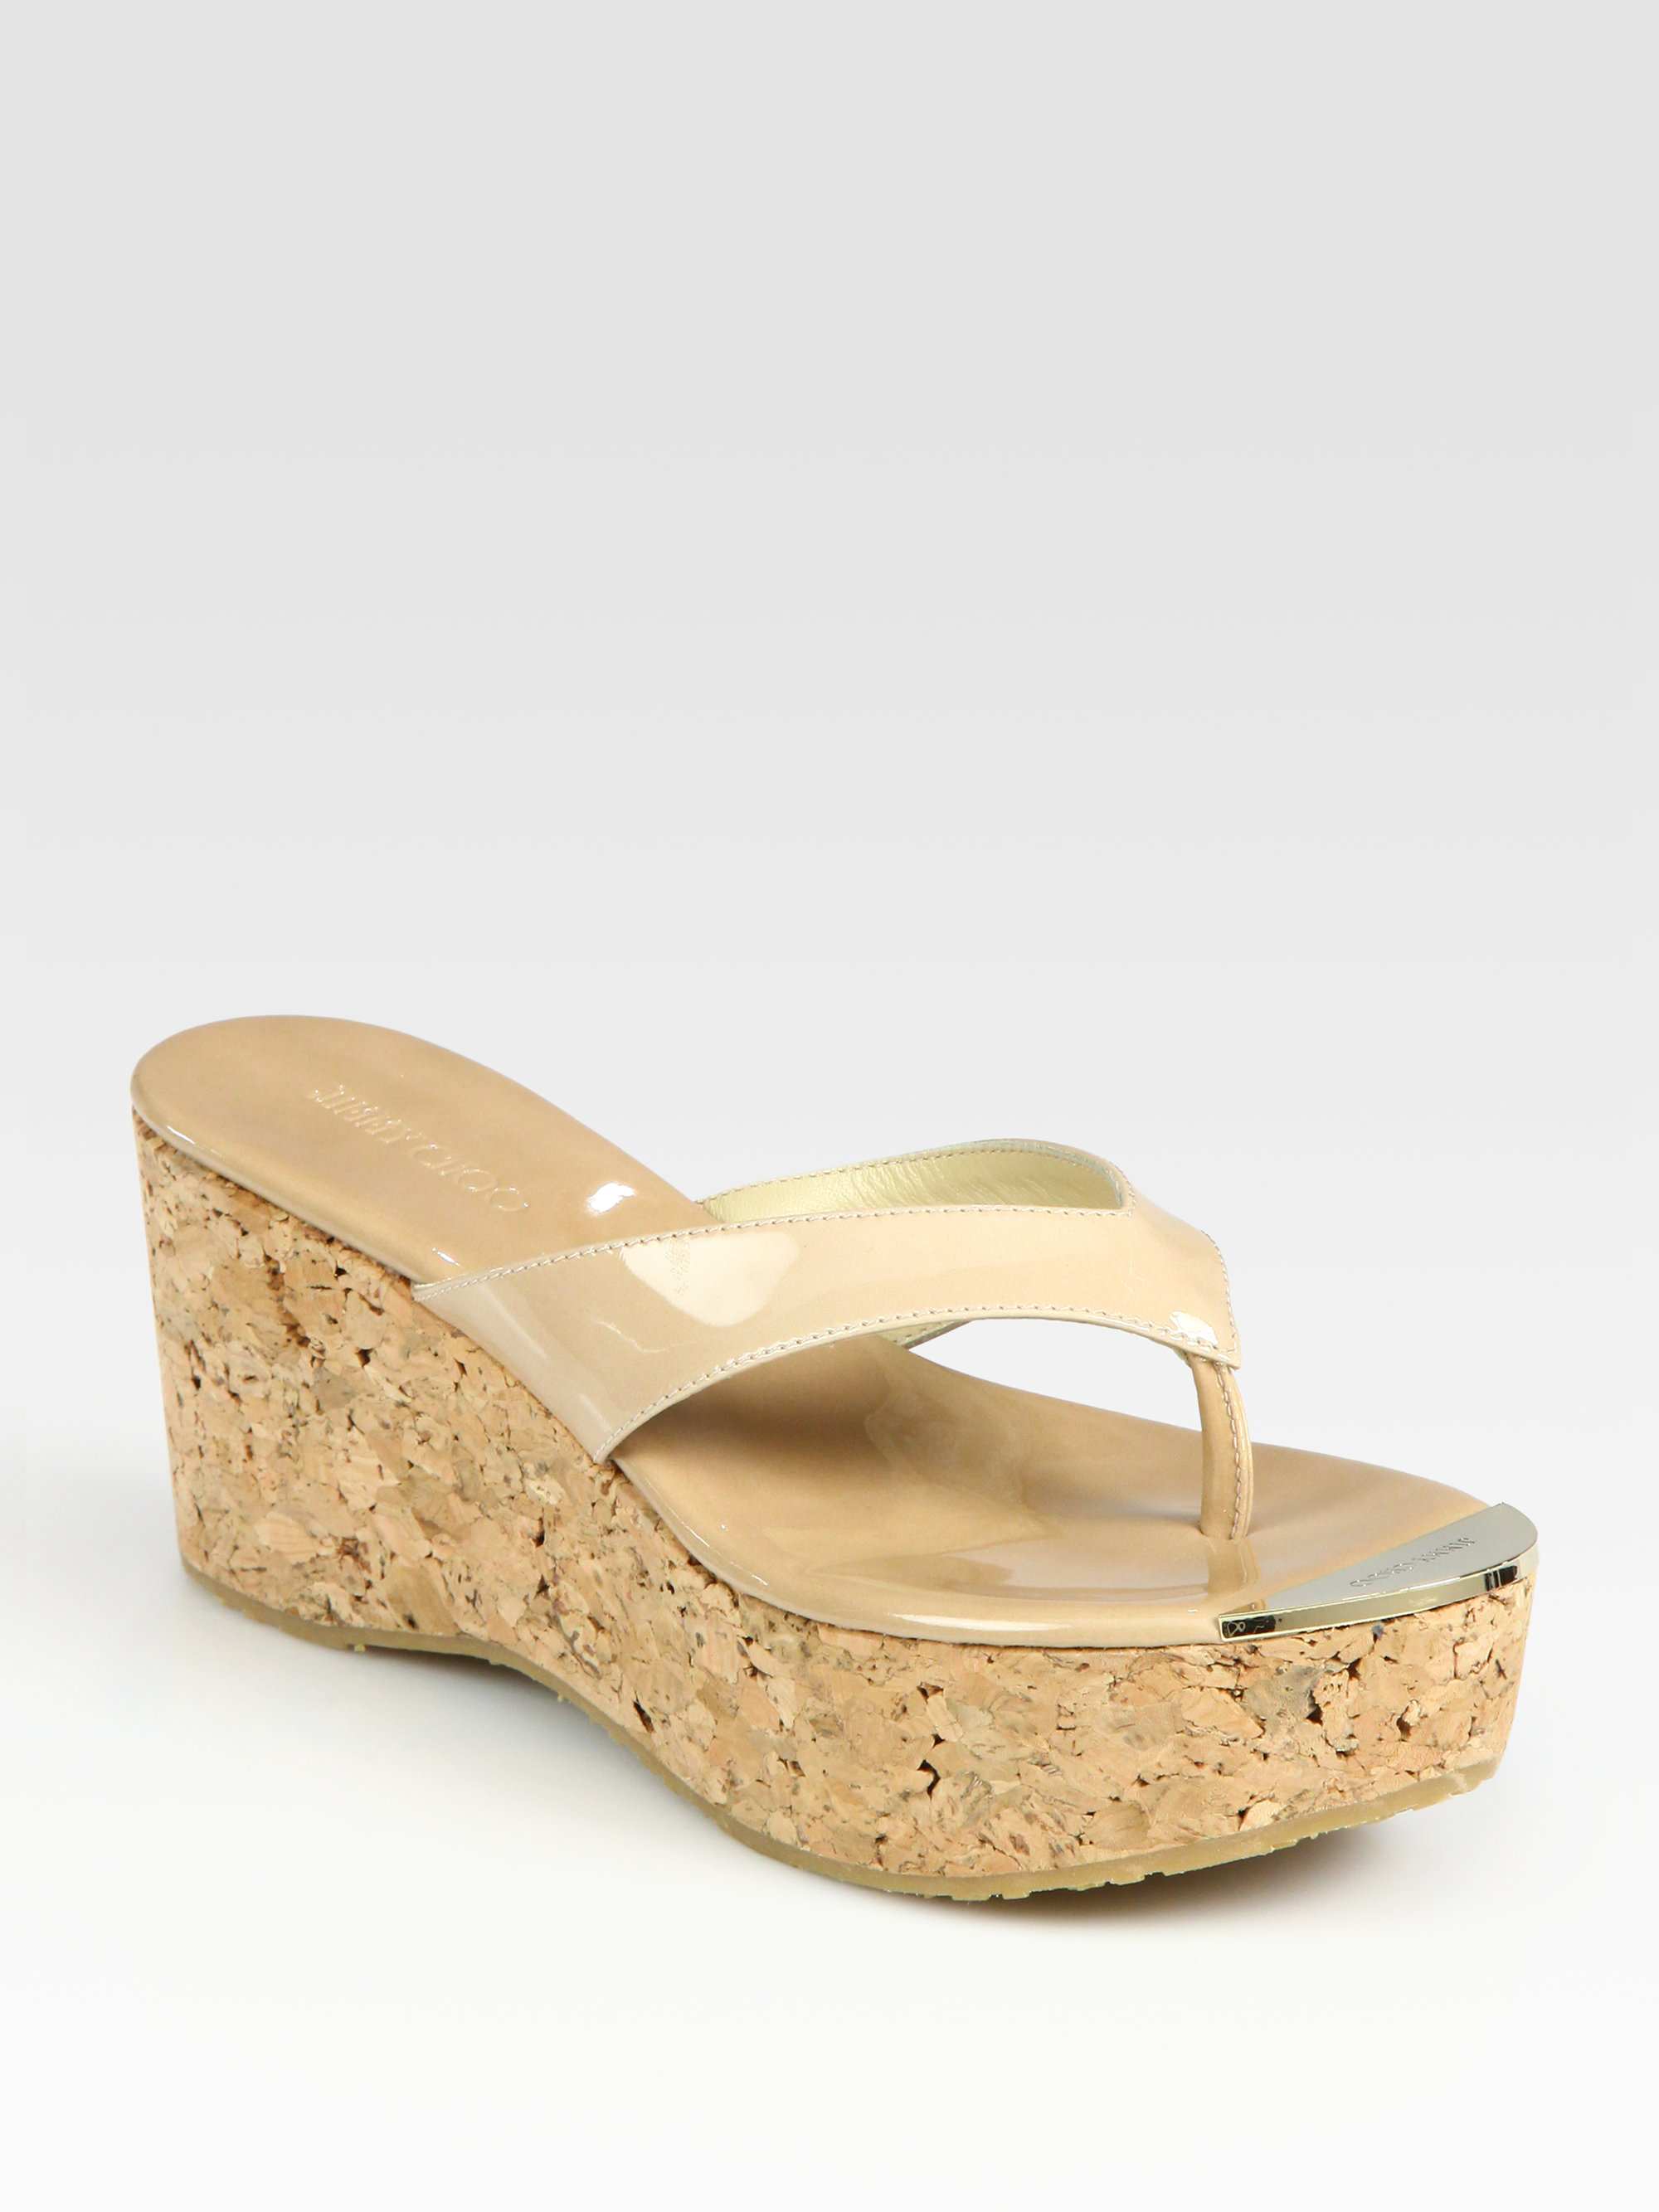 Lyst - Jimmy Choo Patent Leather Wedge Sandals in Natural